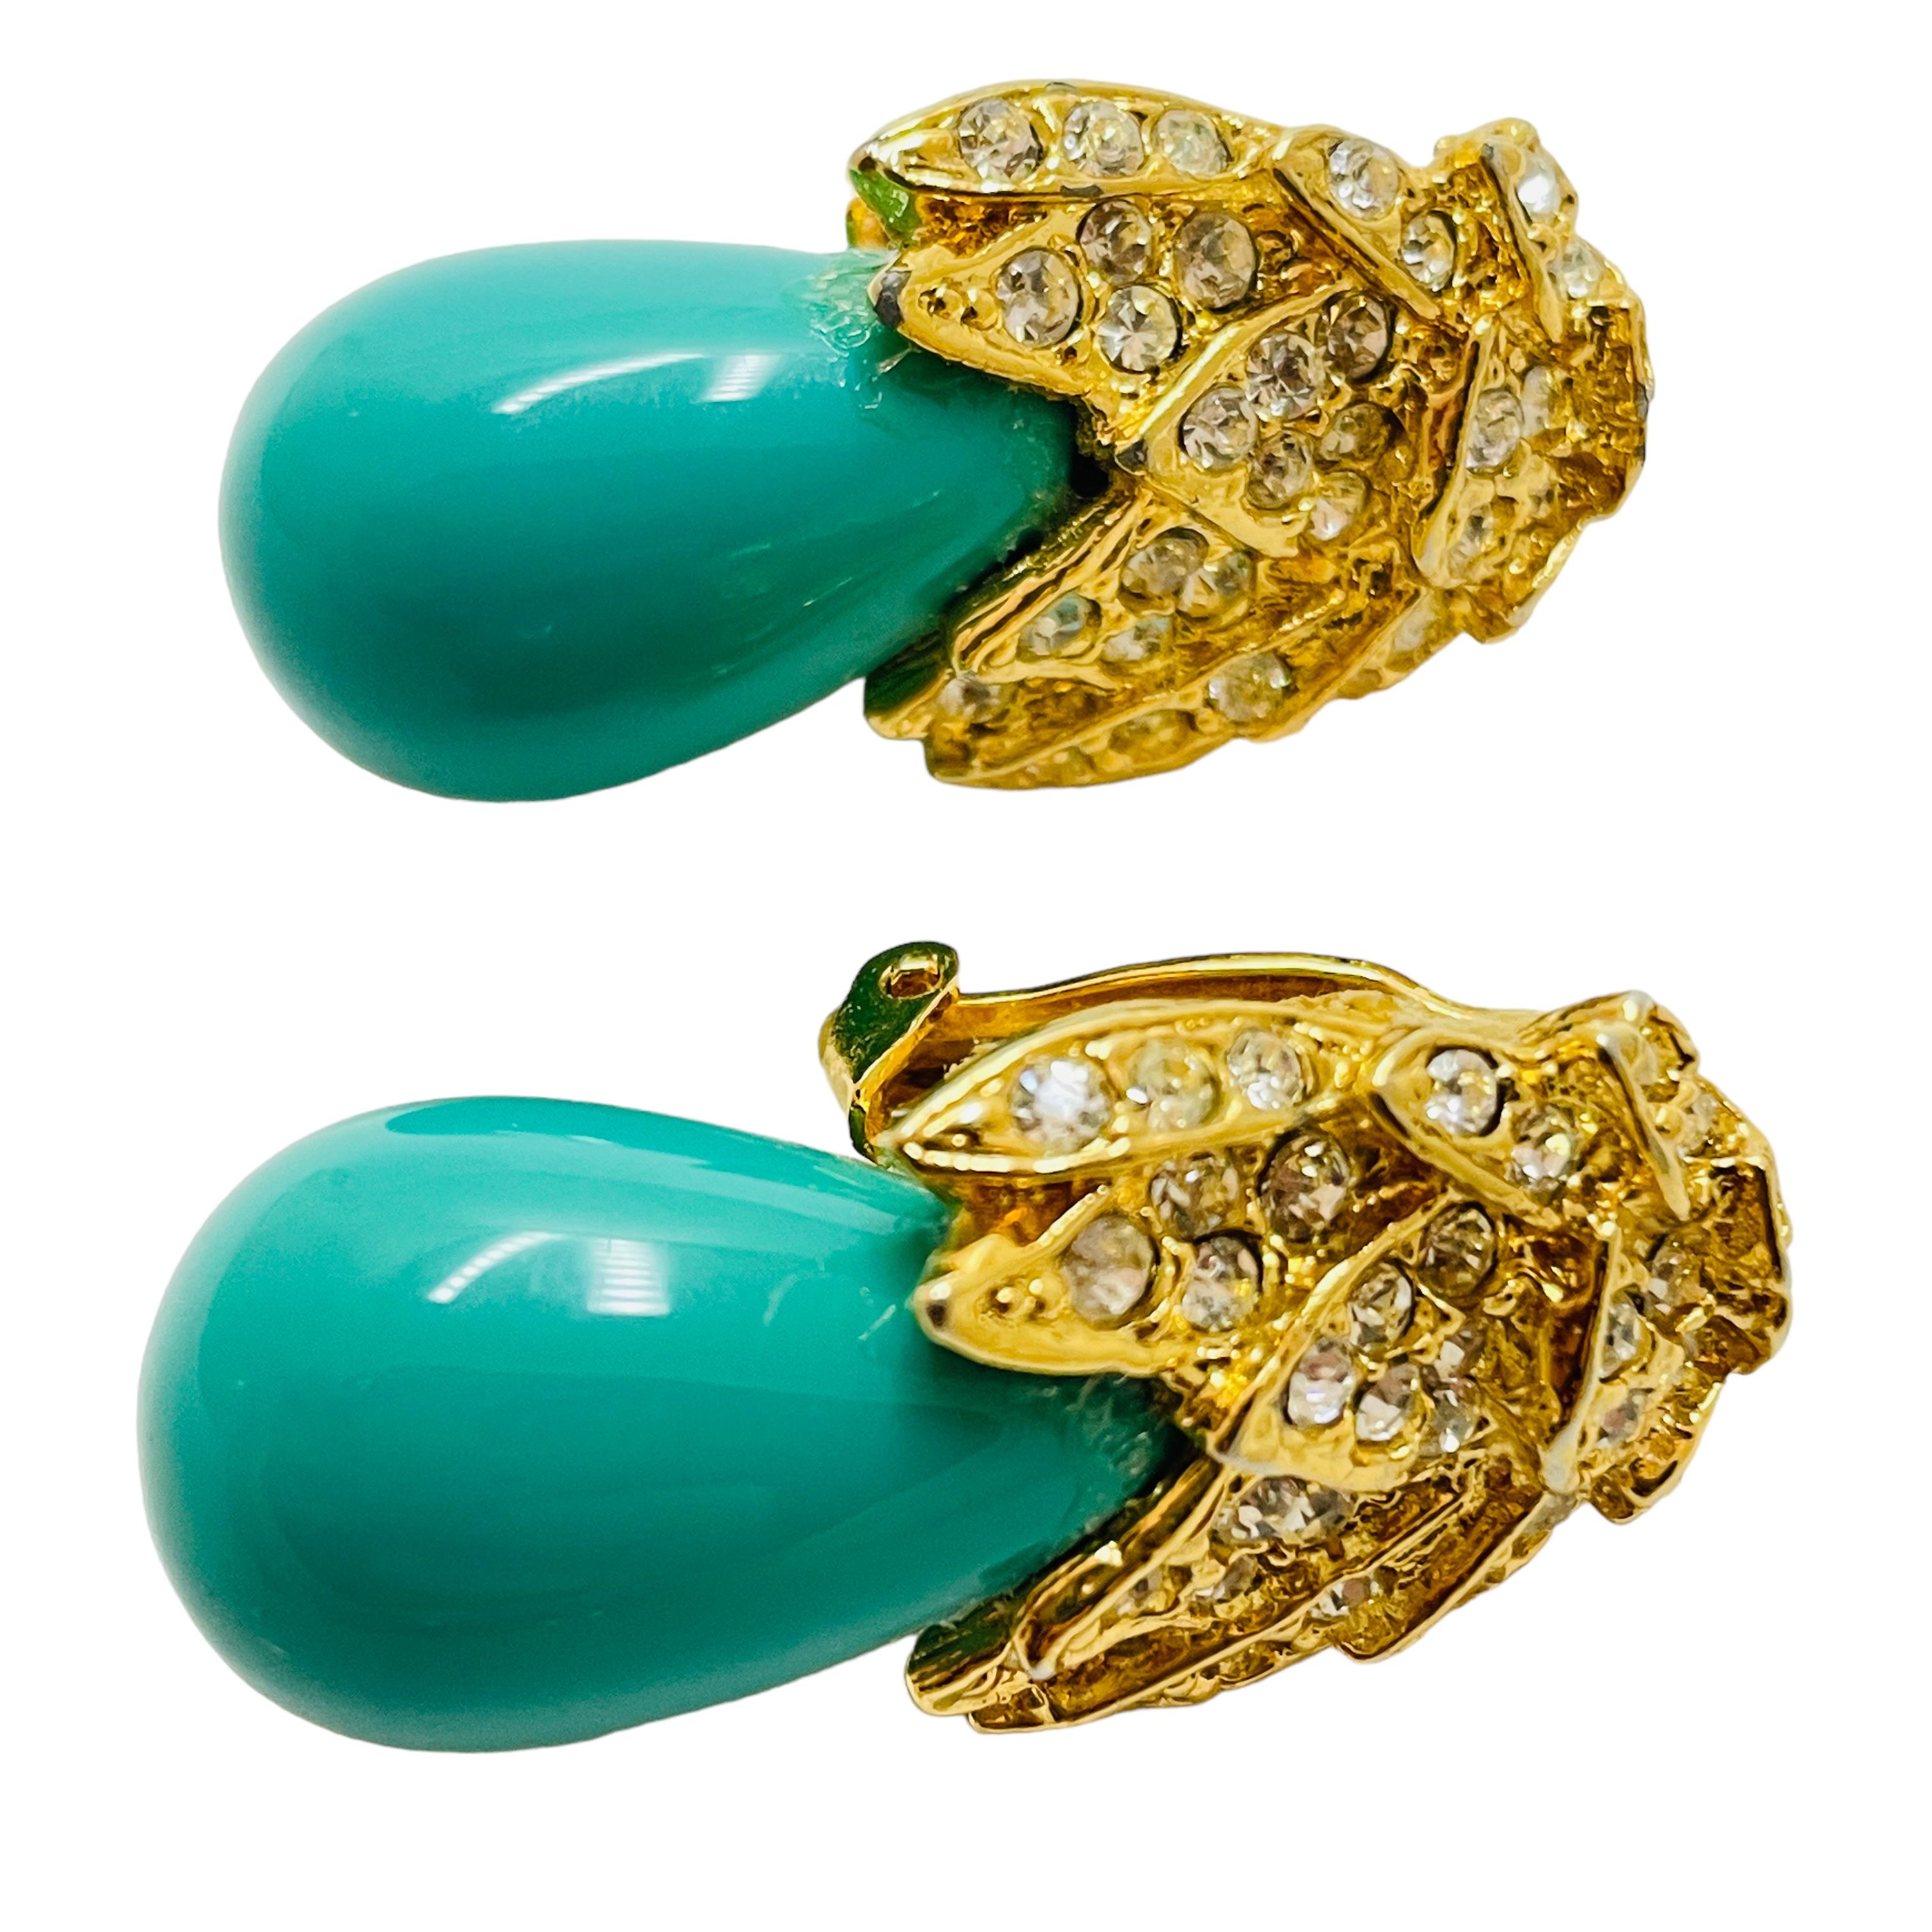 DETAILS

• signed KENNETH LANE 

• gold tone with faux turquoise and rhinestones 

• vintage designer runway earrings  

MEASUREMENTS  

• 

CONDITION

•  very good vintage condition with minimal signs of wear 

 Sku 36

❤️❤️  VINTAGE DESIGNER